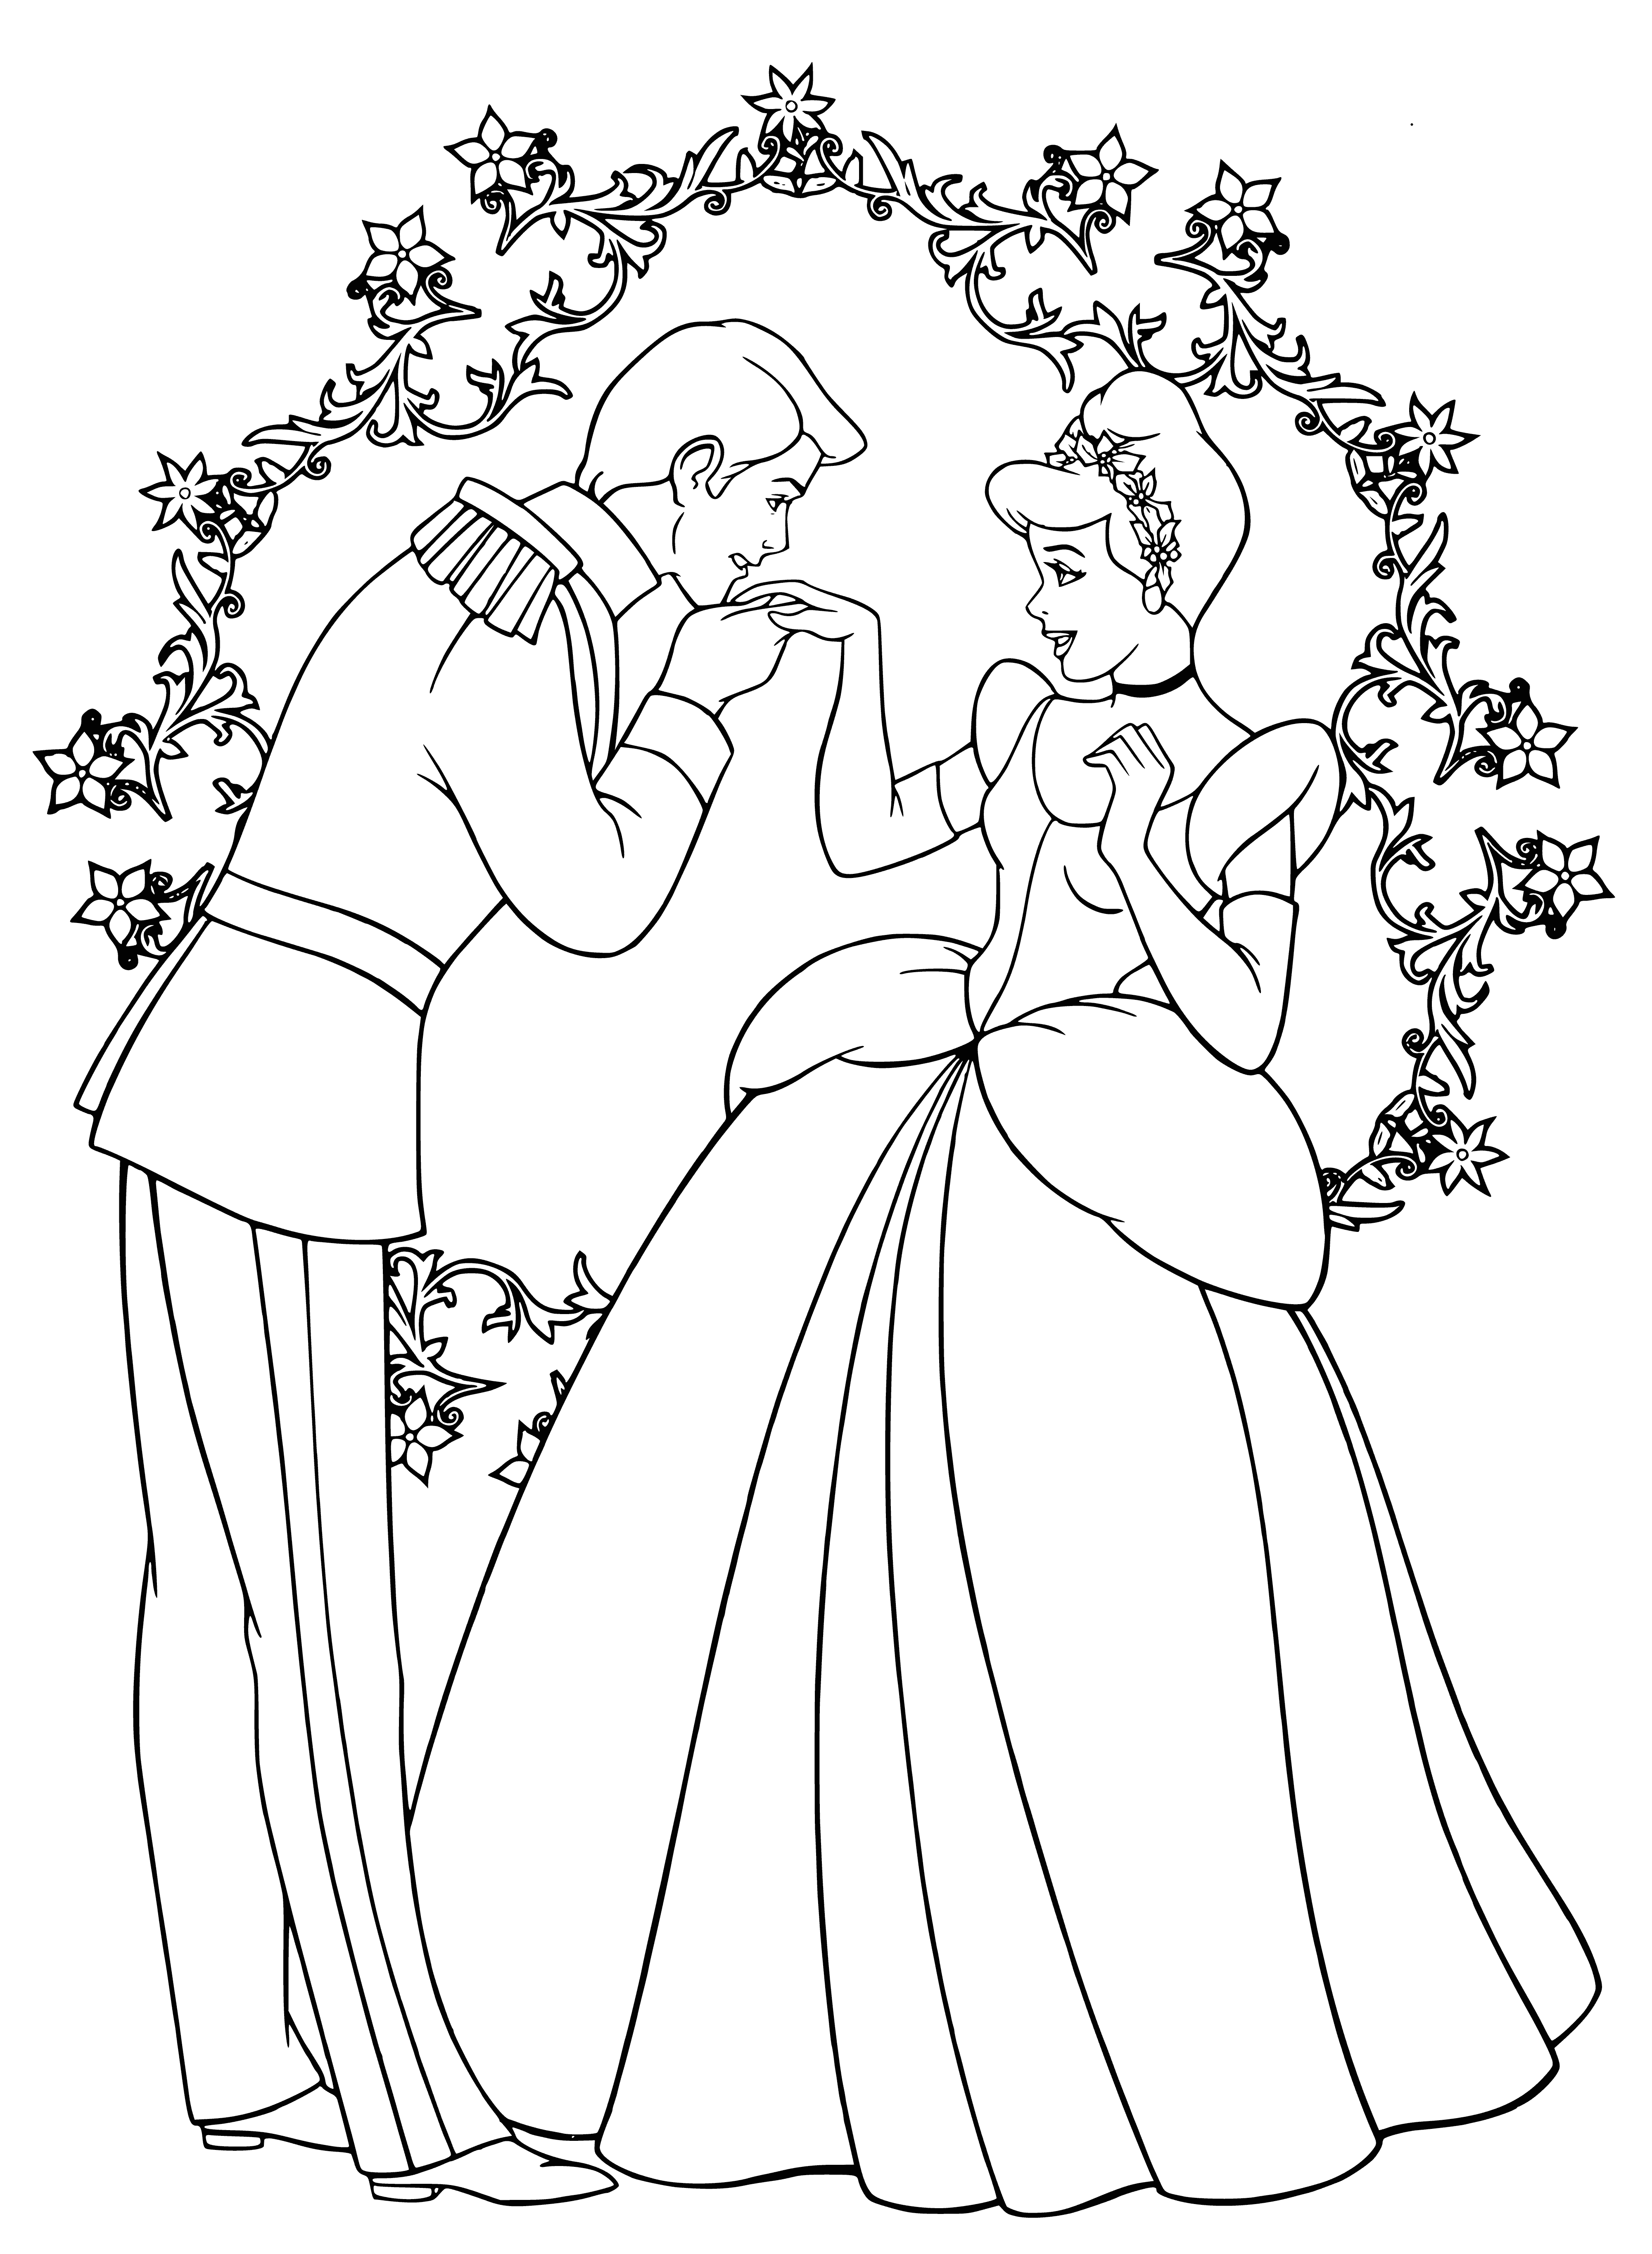 coloring page: Disney princesses welcome New Year with Cinderella and prince in romantic embrace, surrounded by colorful streamers and confetti.